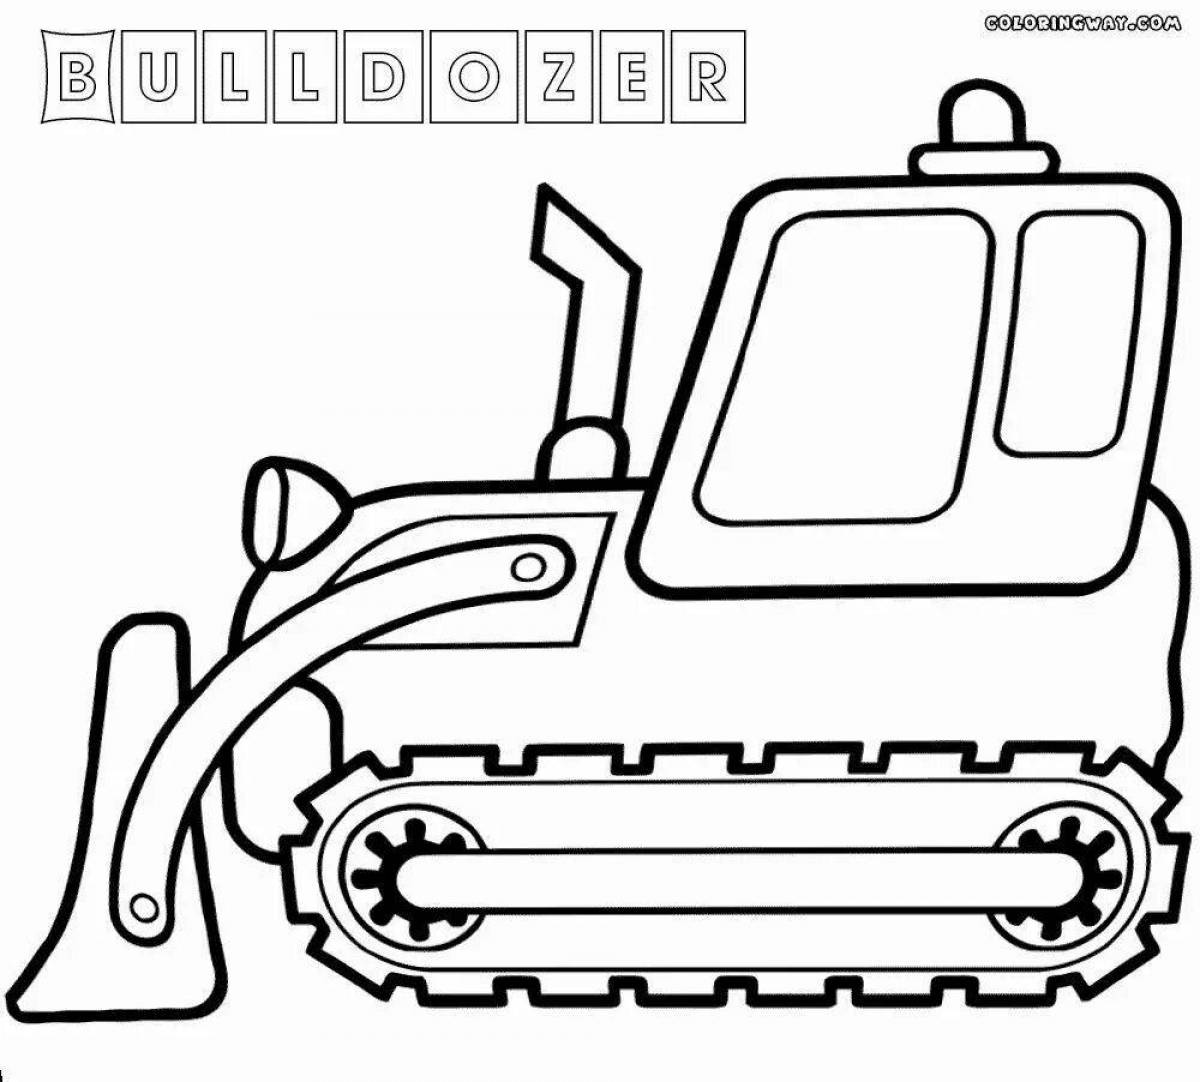 Great bulldozer coloring book for the little ones